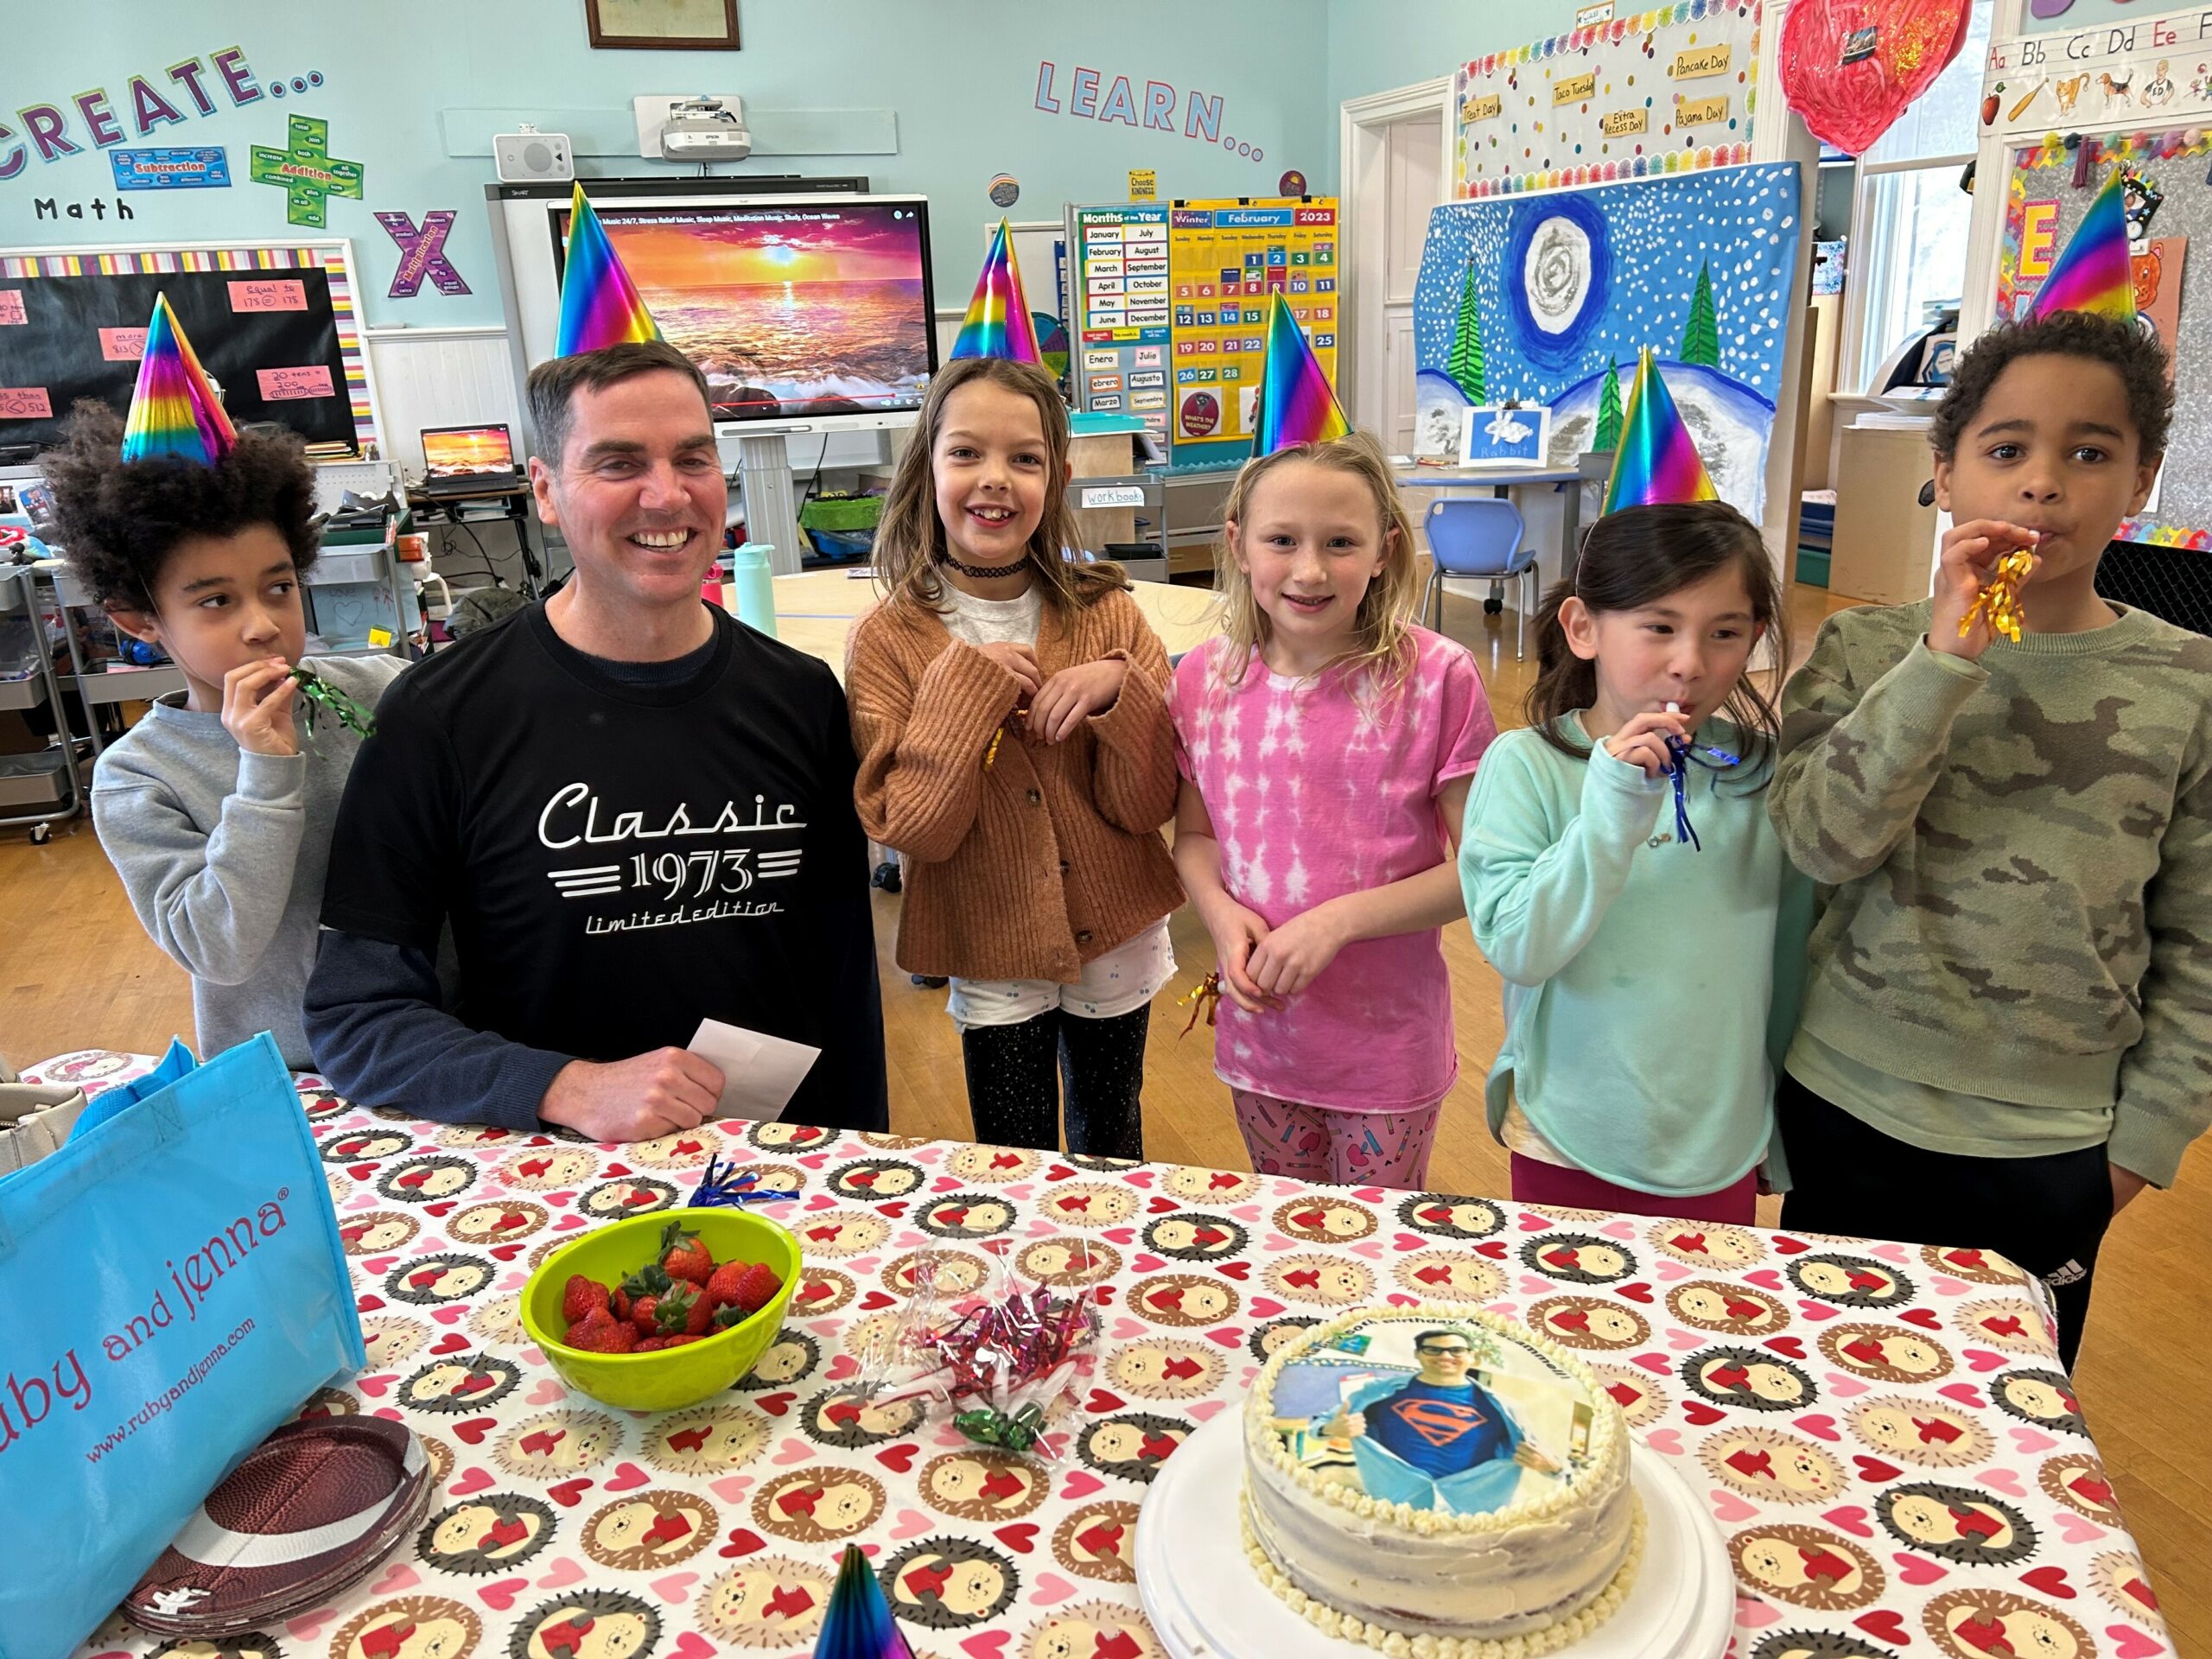 Lead Sagaponack School teacher Terry Scammell had a terrific 50th birthday party at school with help from his students. COURTESY SAGAPONACK SCHOOL